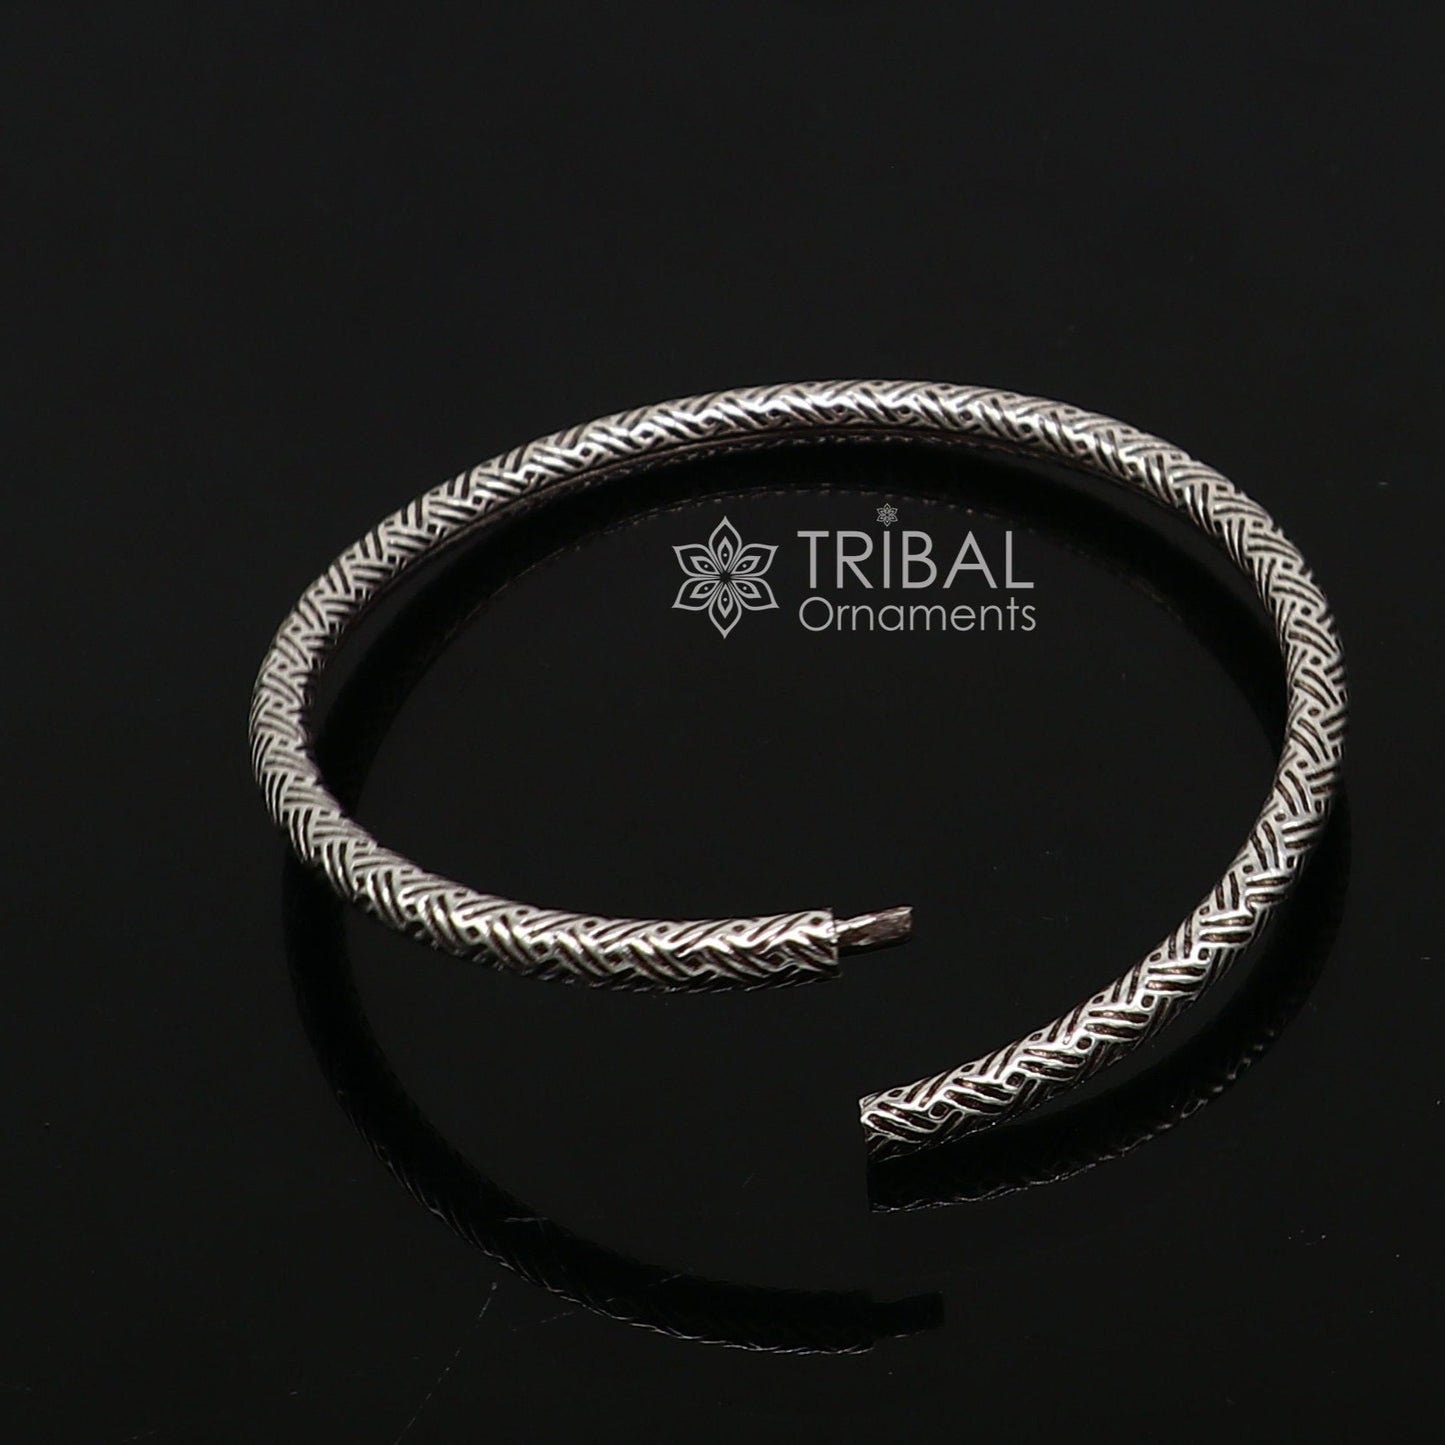 Pure 925 sterling silver unique vintage style bangle bracelet kada, excellent classical gifting bangle men's or girls ethnic jewelry nsk671 - TRIBAL ORNAMENTS